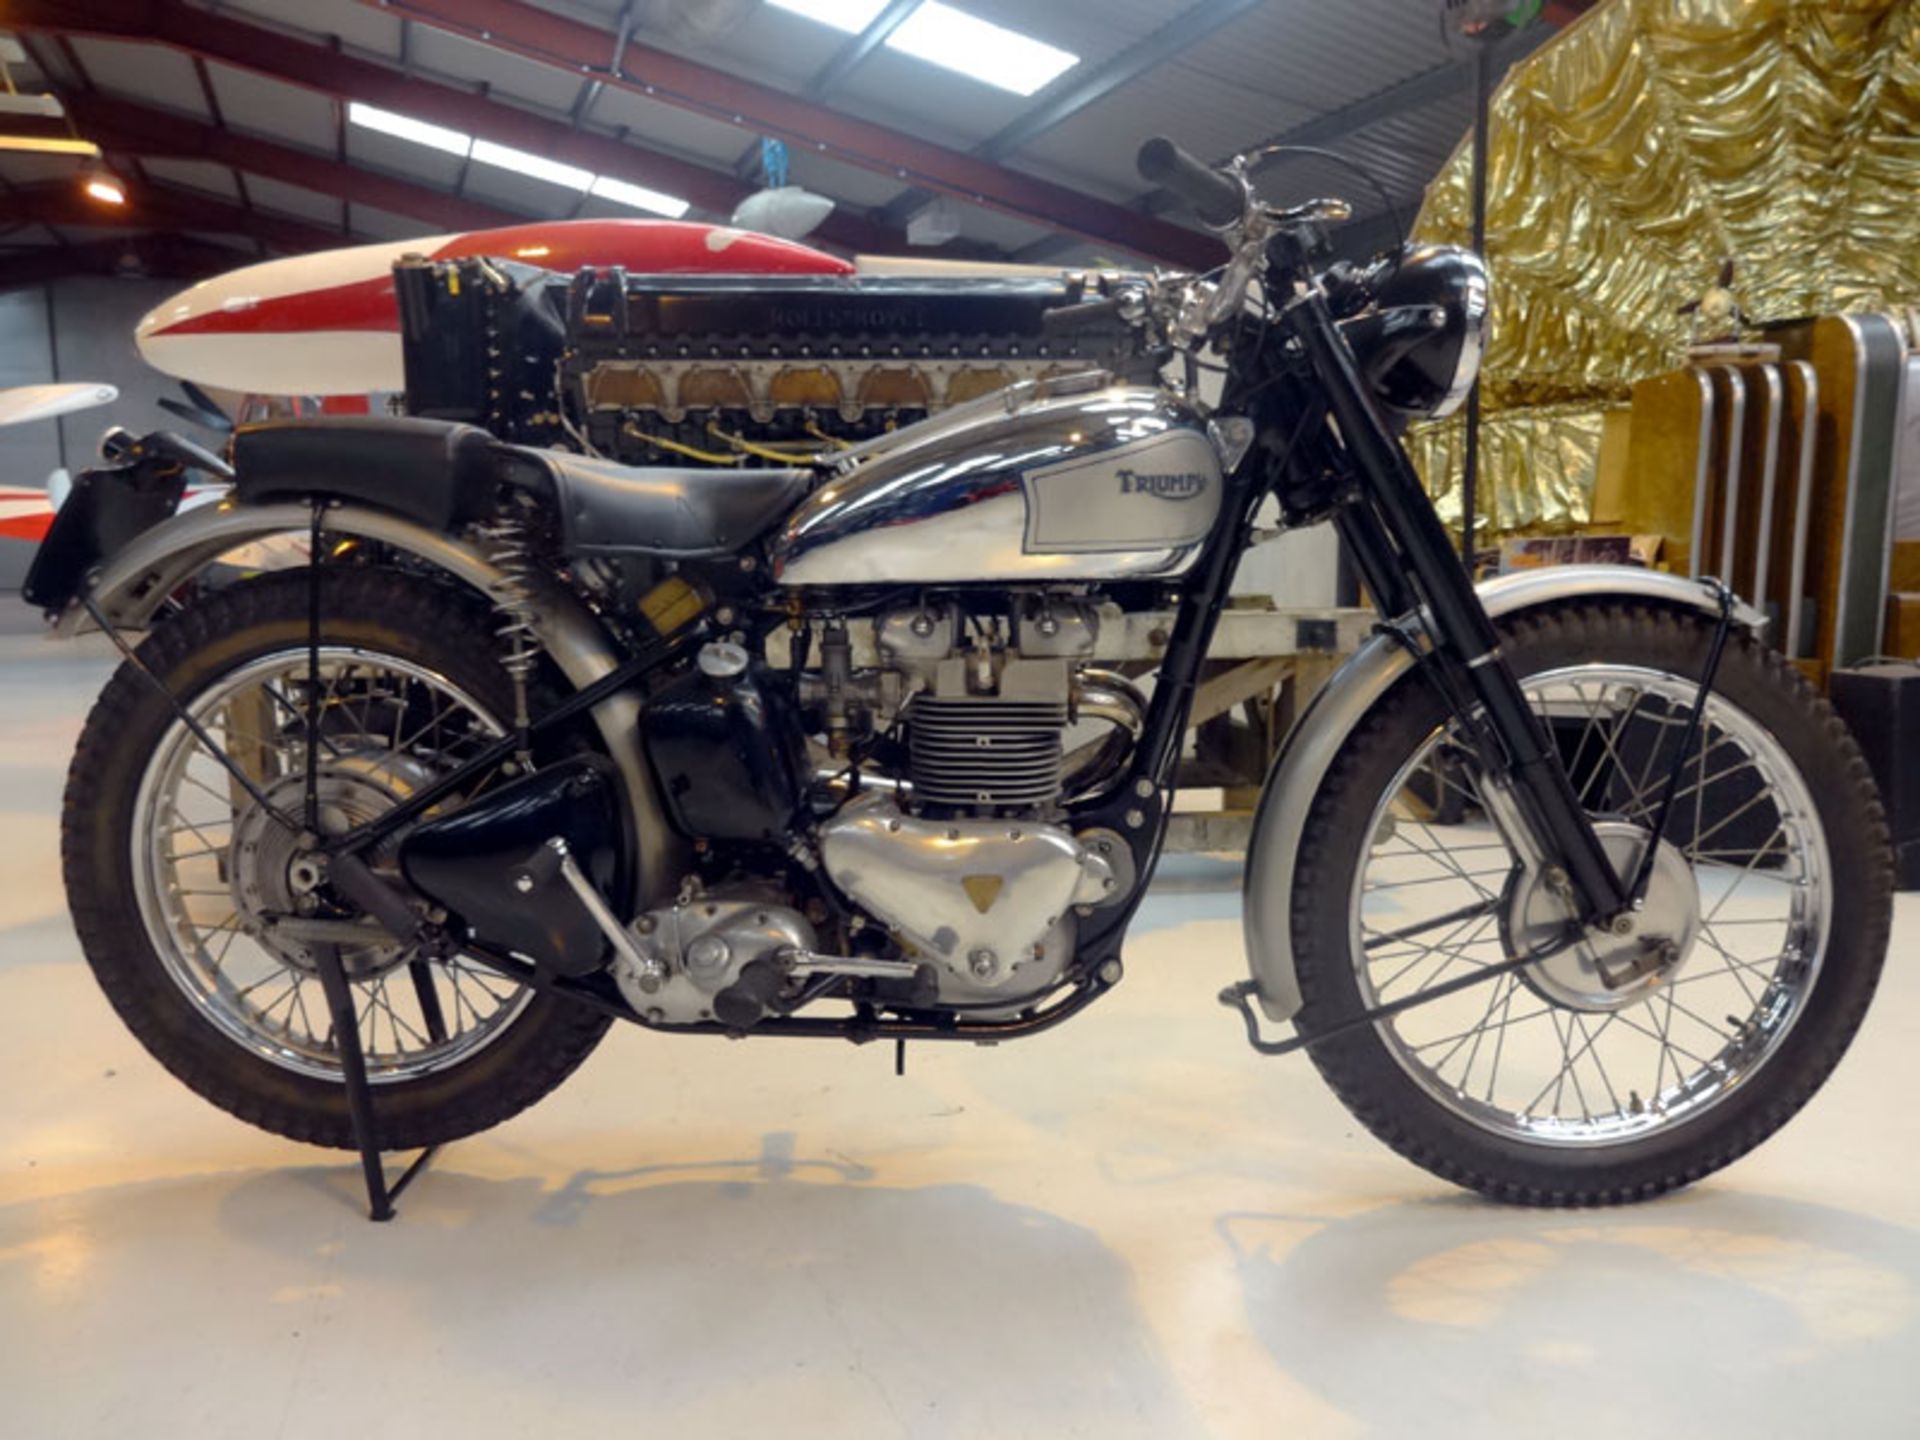 - Part of a private collection

- Restored bike

- Comes with V5 and ownership history - Image 2 of 5